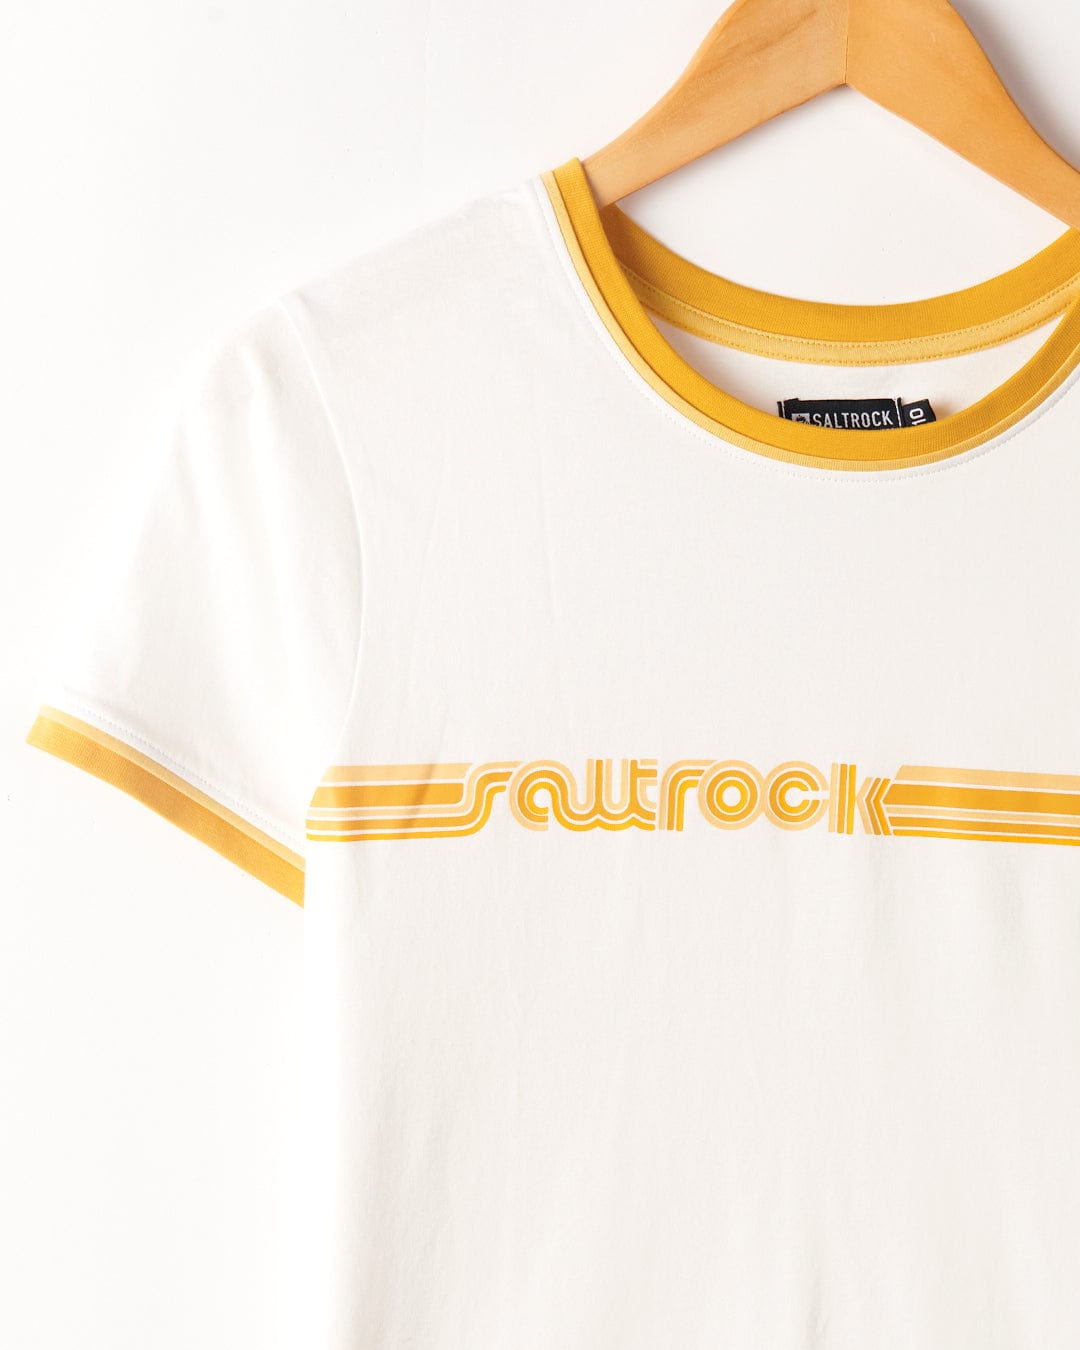 Saltrock's Retro Ribbon - Womens Shorts Sleeve T-Shirt in White with retro stripes and the word "squrock" printed across the chest, hanging on a wooden hanger against a white background.